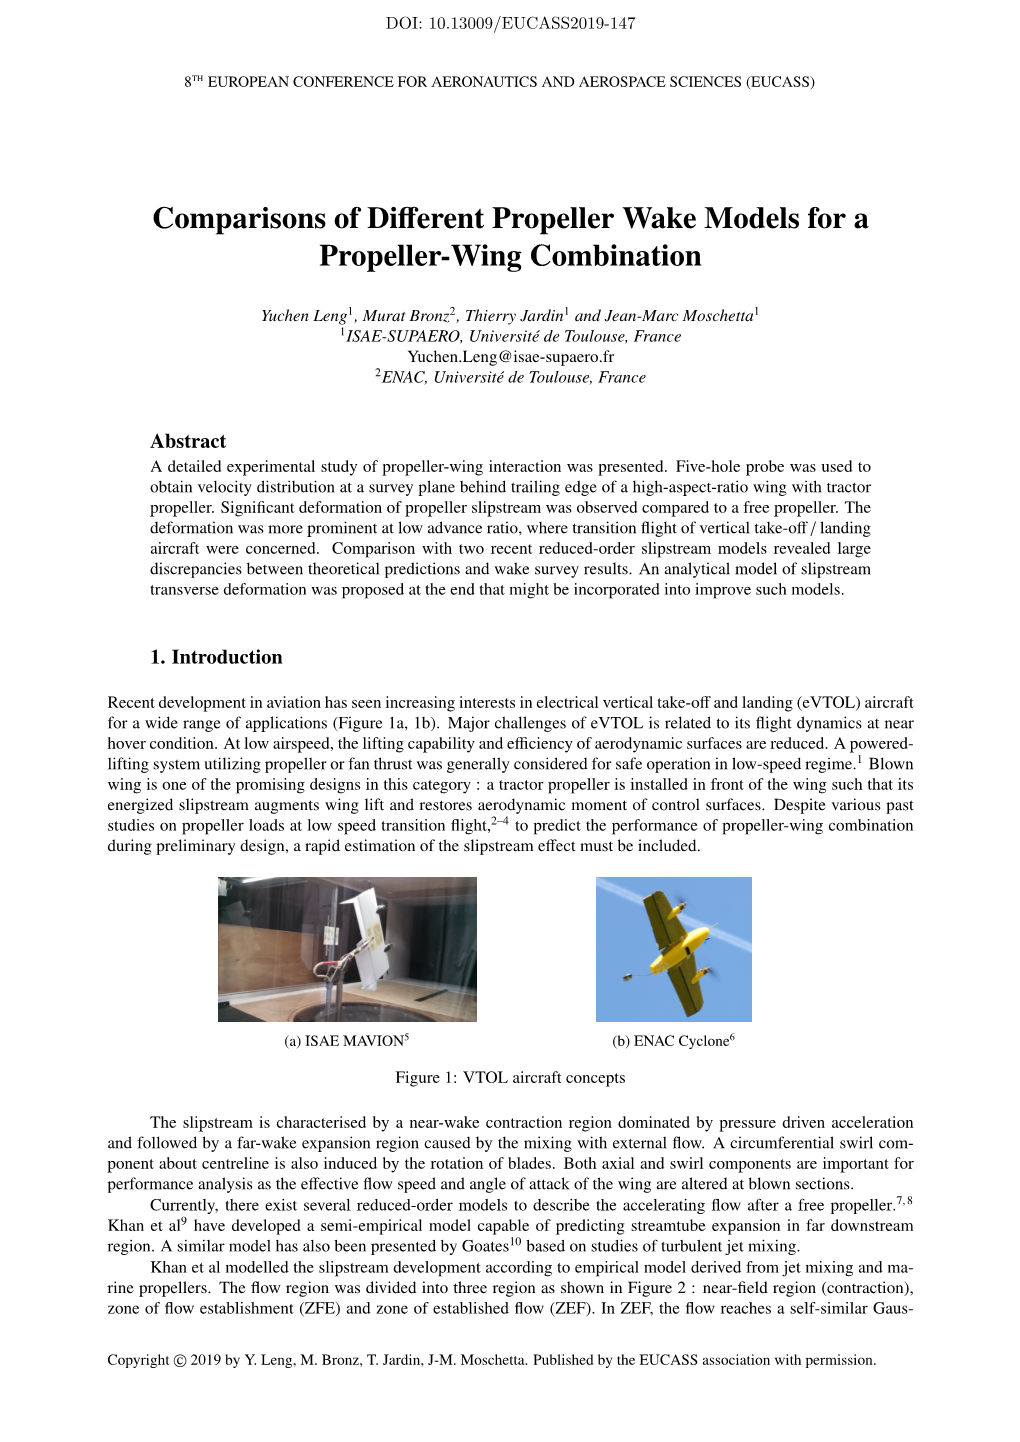 Comparisons of Different Propeller Wake Models for A